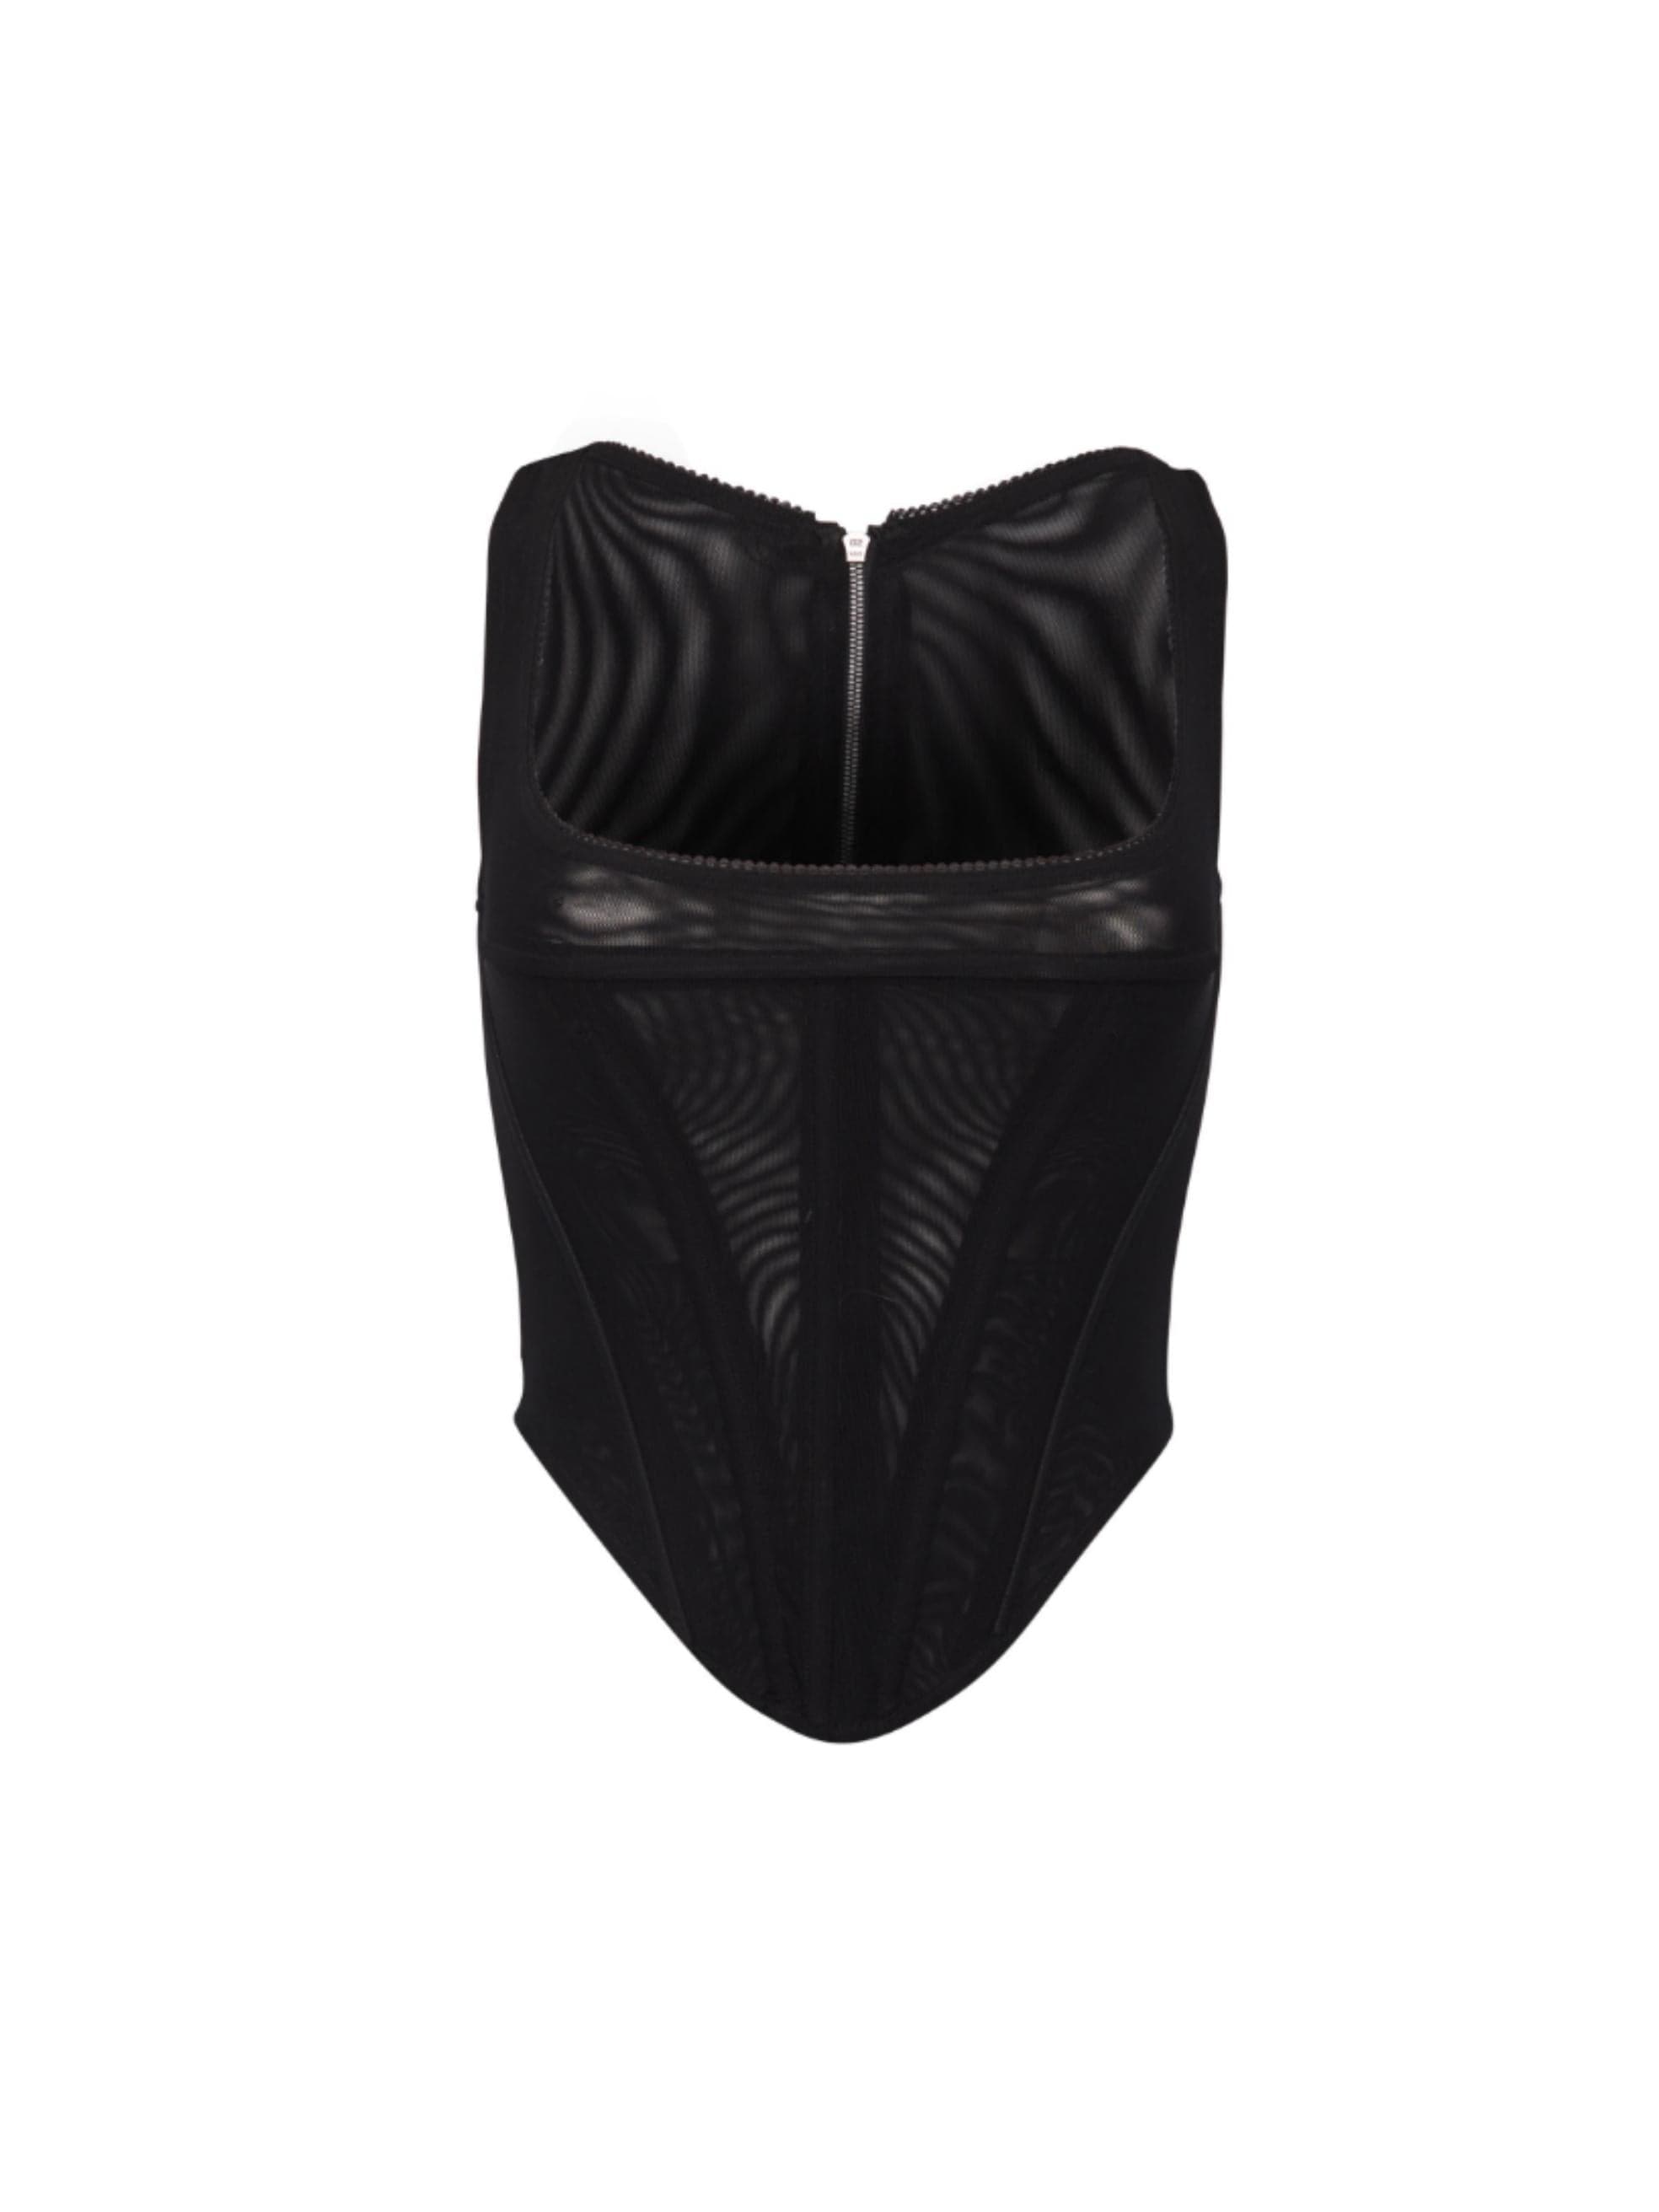 Campbell Corset in Black